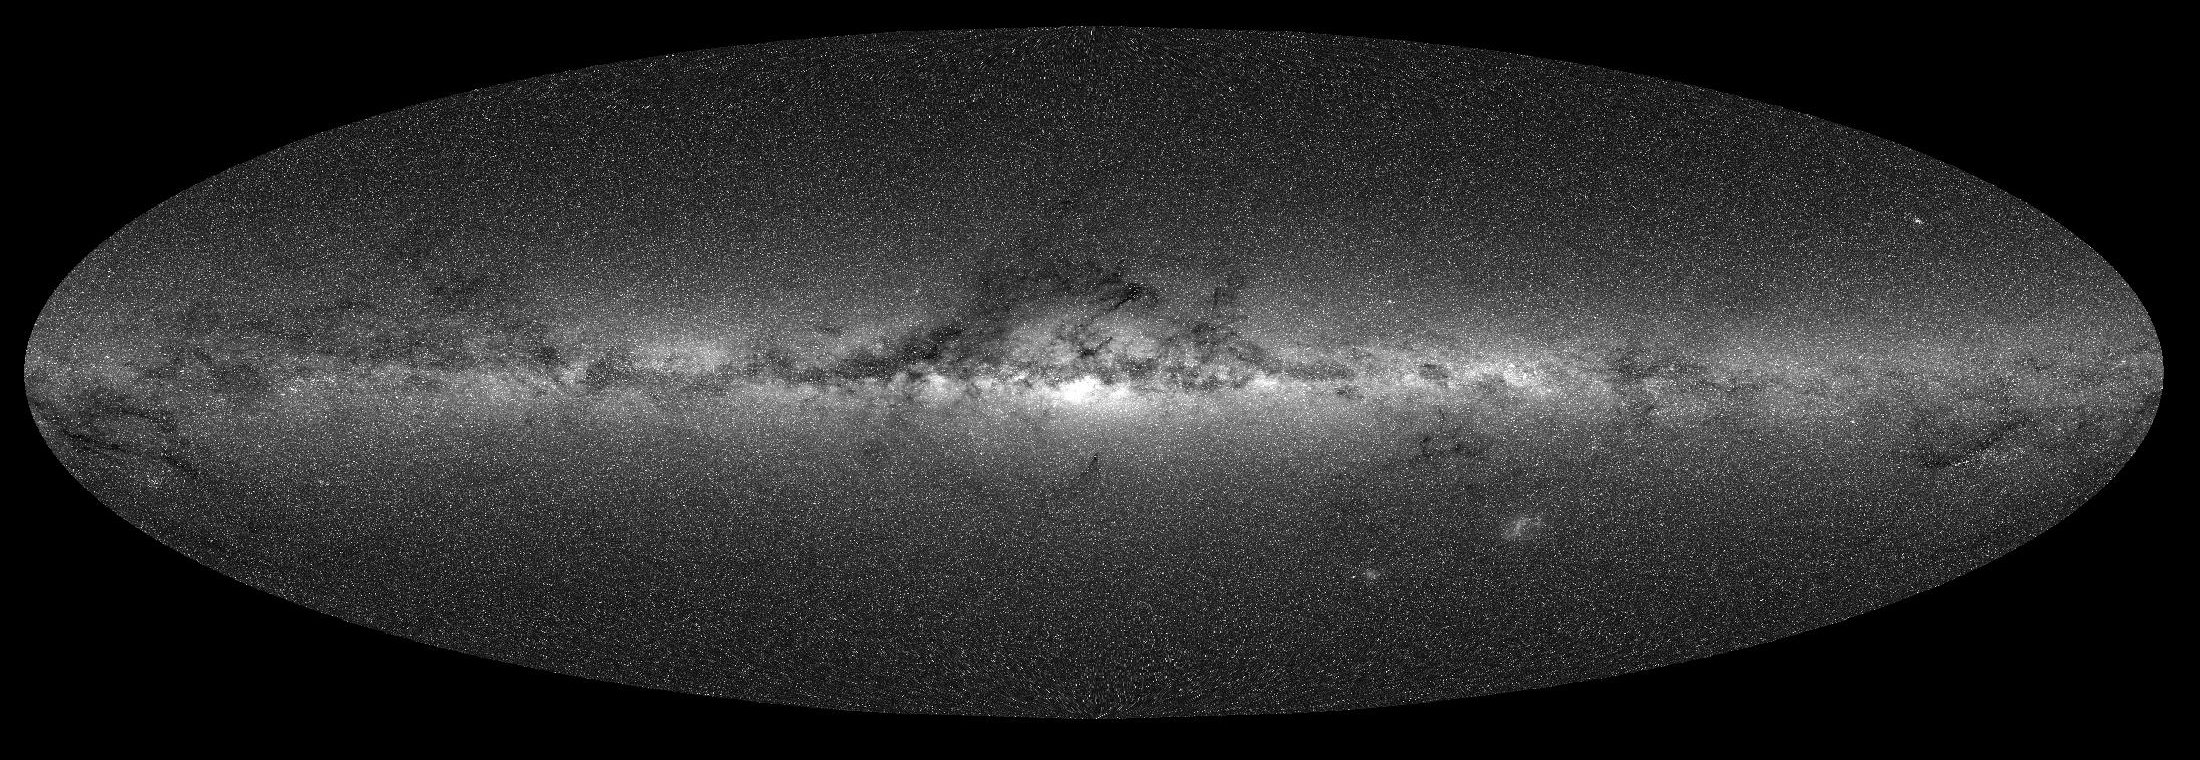 Milky Way image from the Gaia data